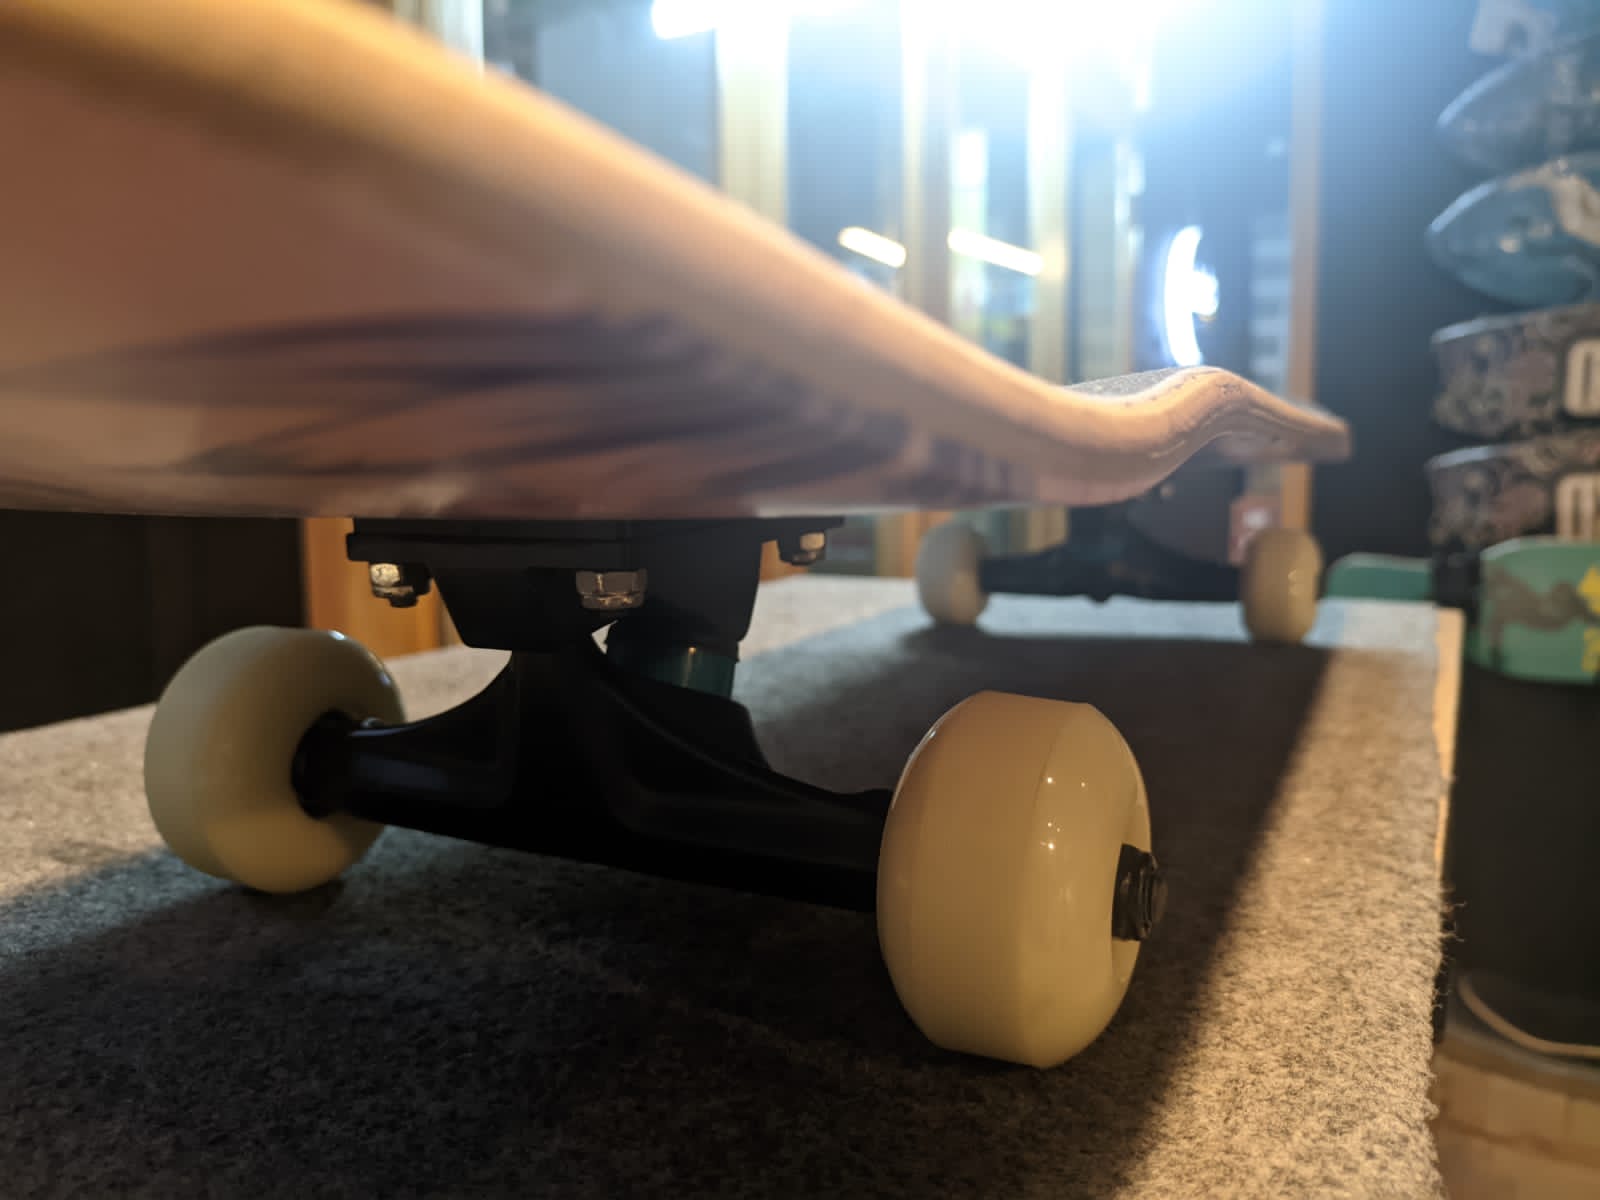 The trucks on your skateboard should not be wider than the deck since that would affect stability and make tricks difficult.